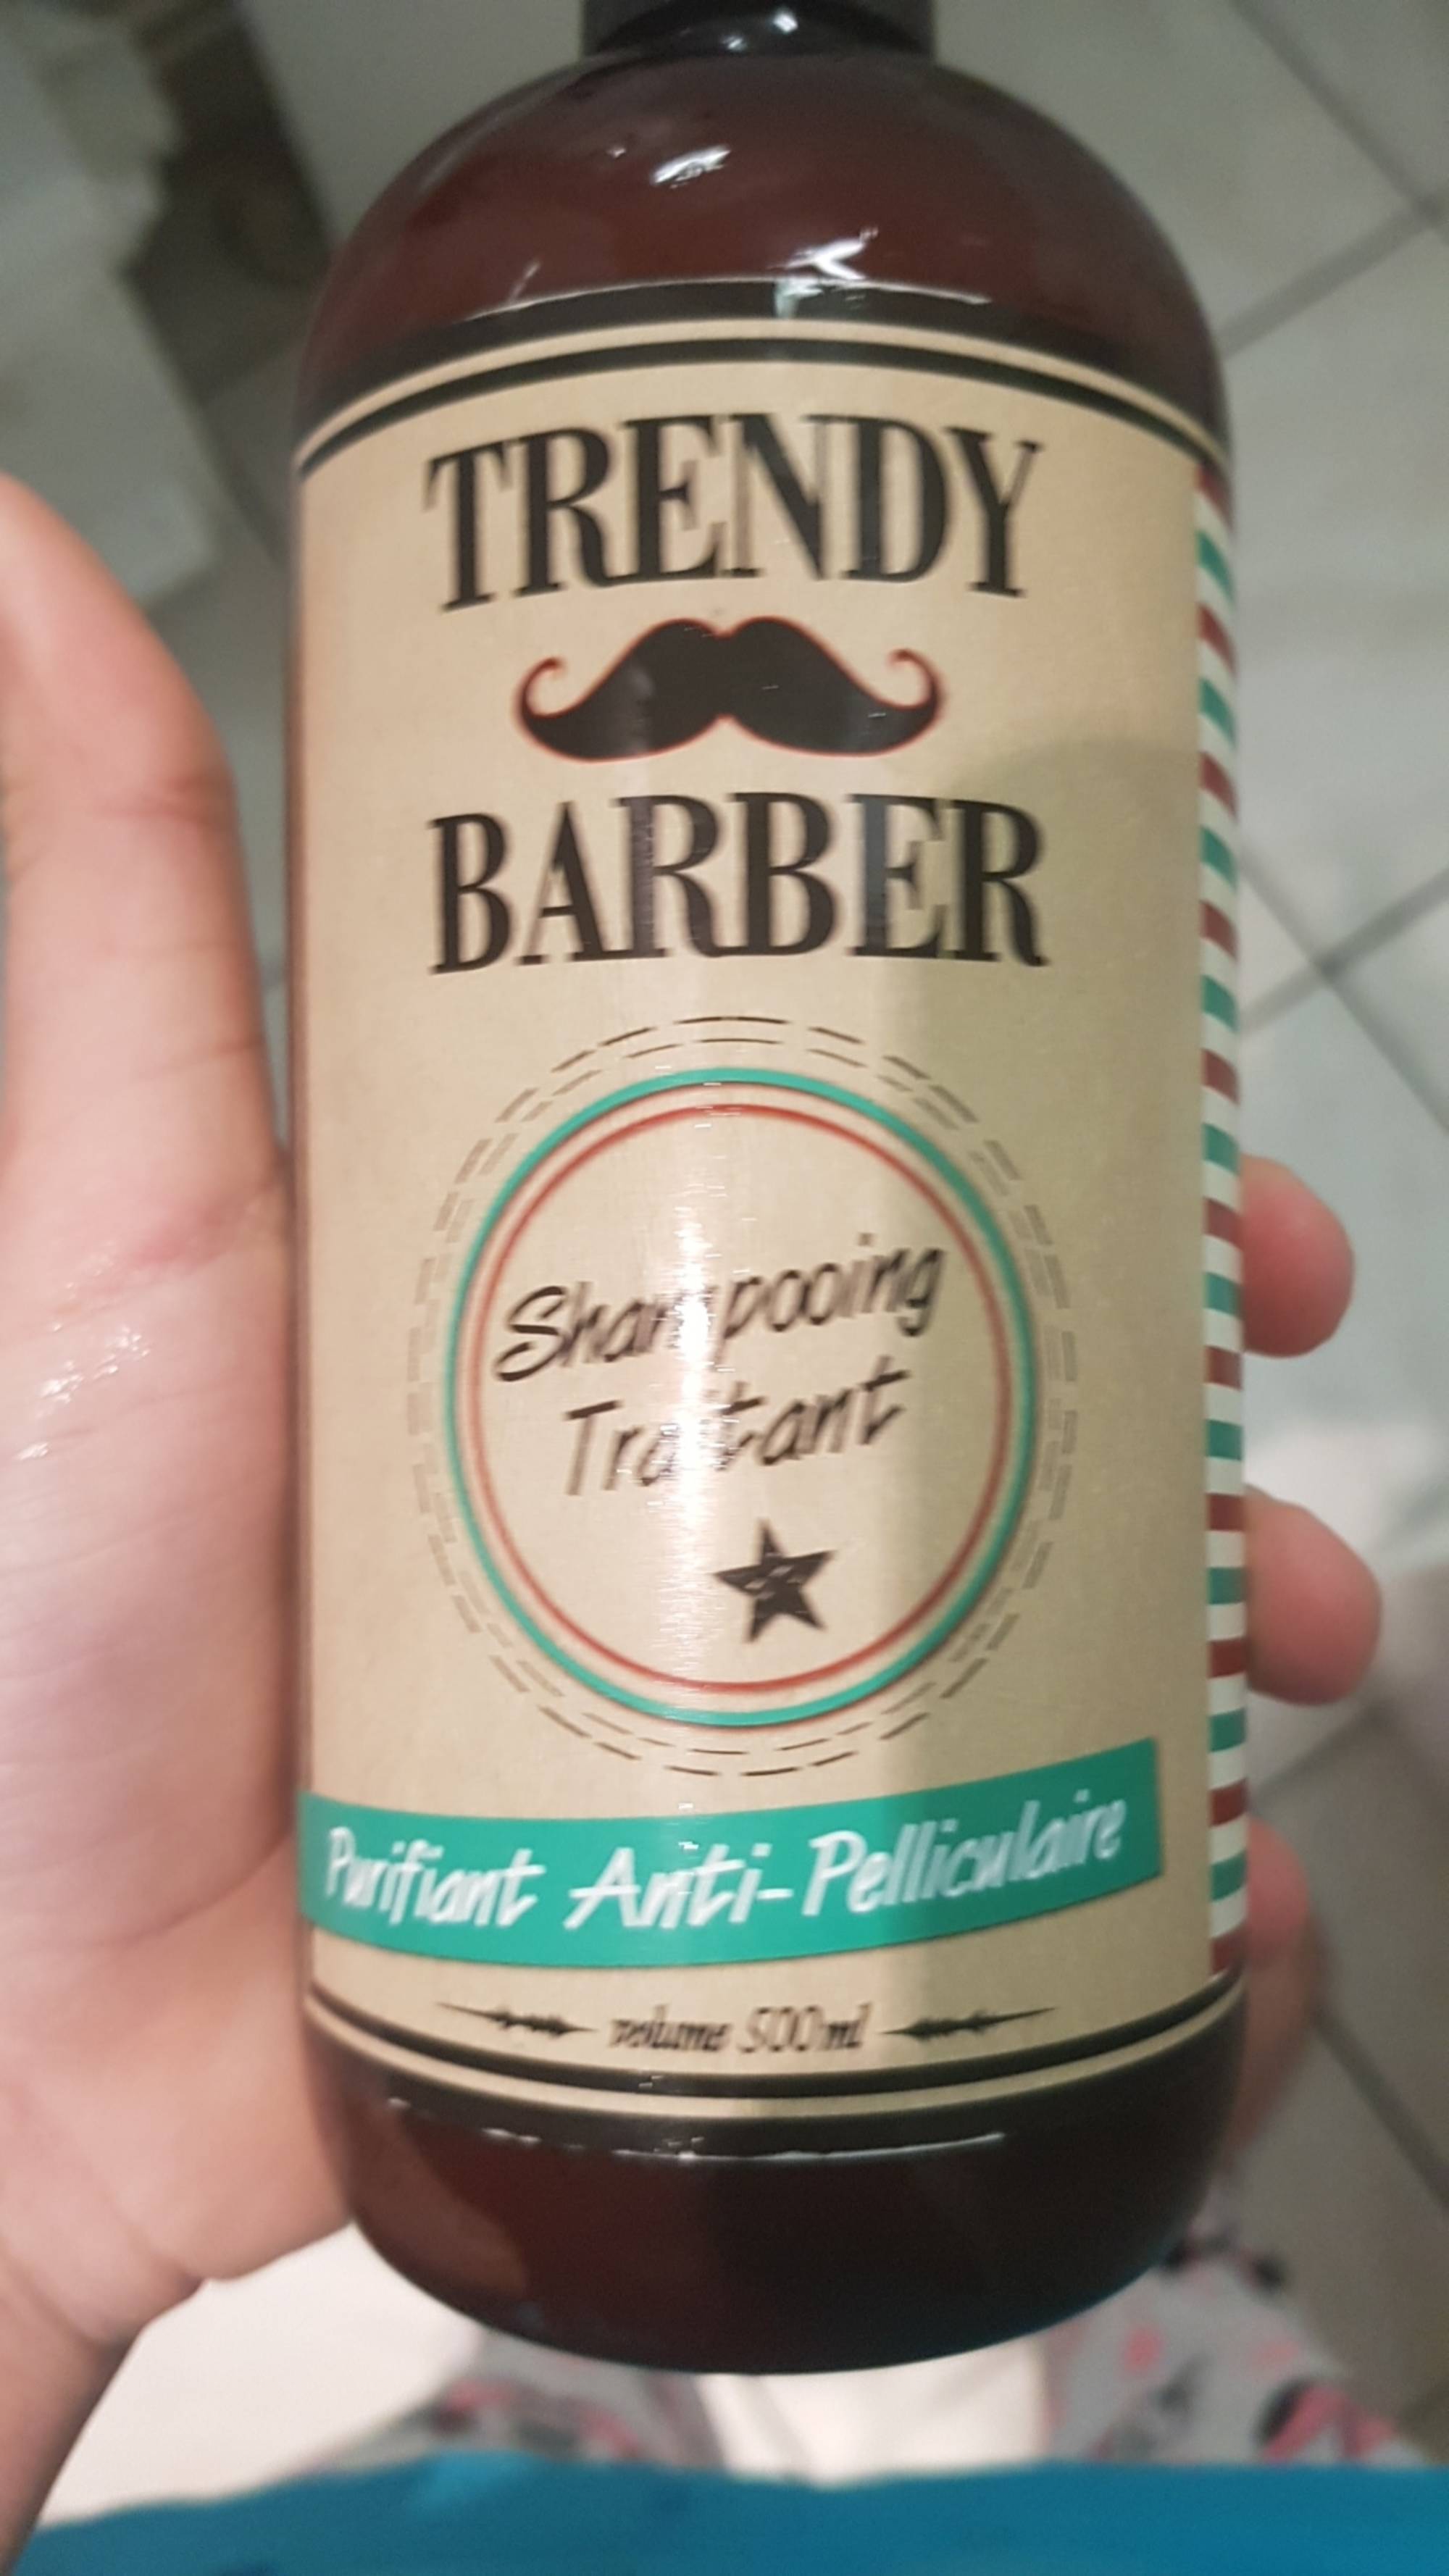 TRENDY BARBER - Shampooing traitant purifiant anti-pelliculaire